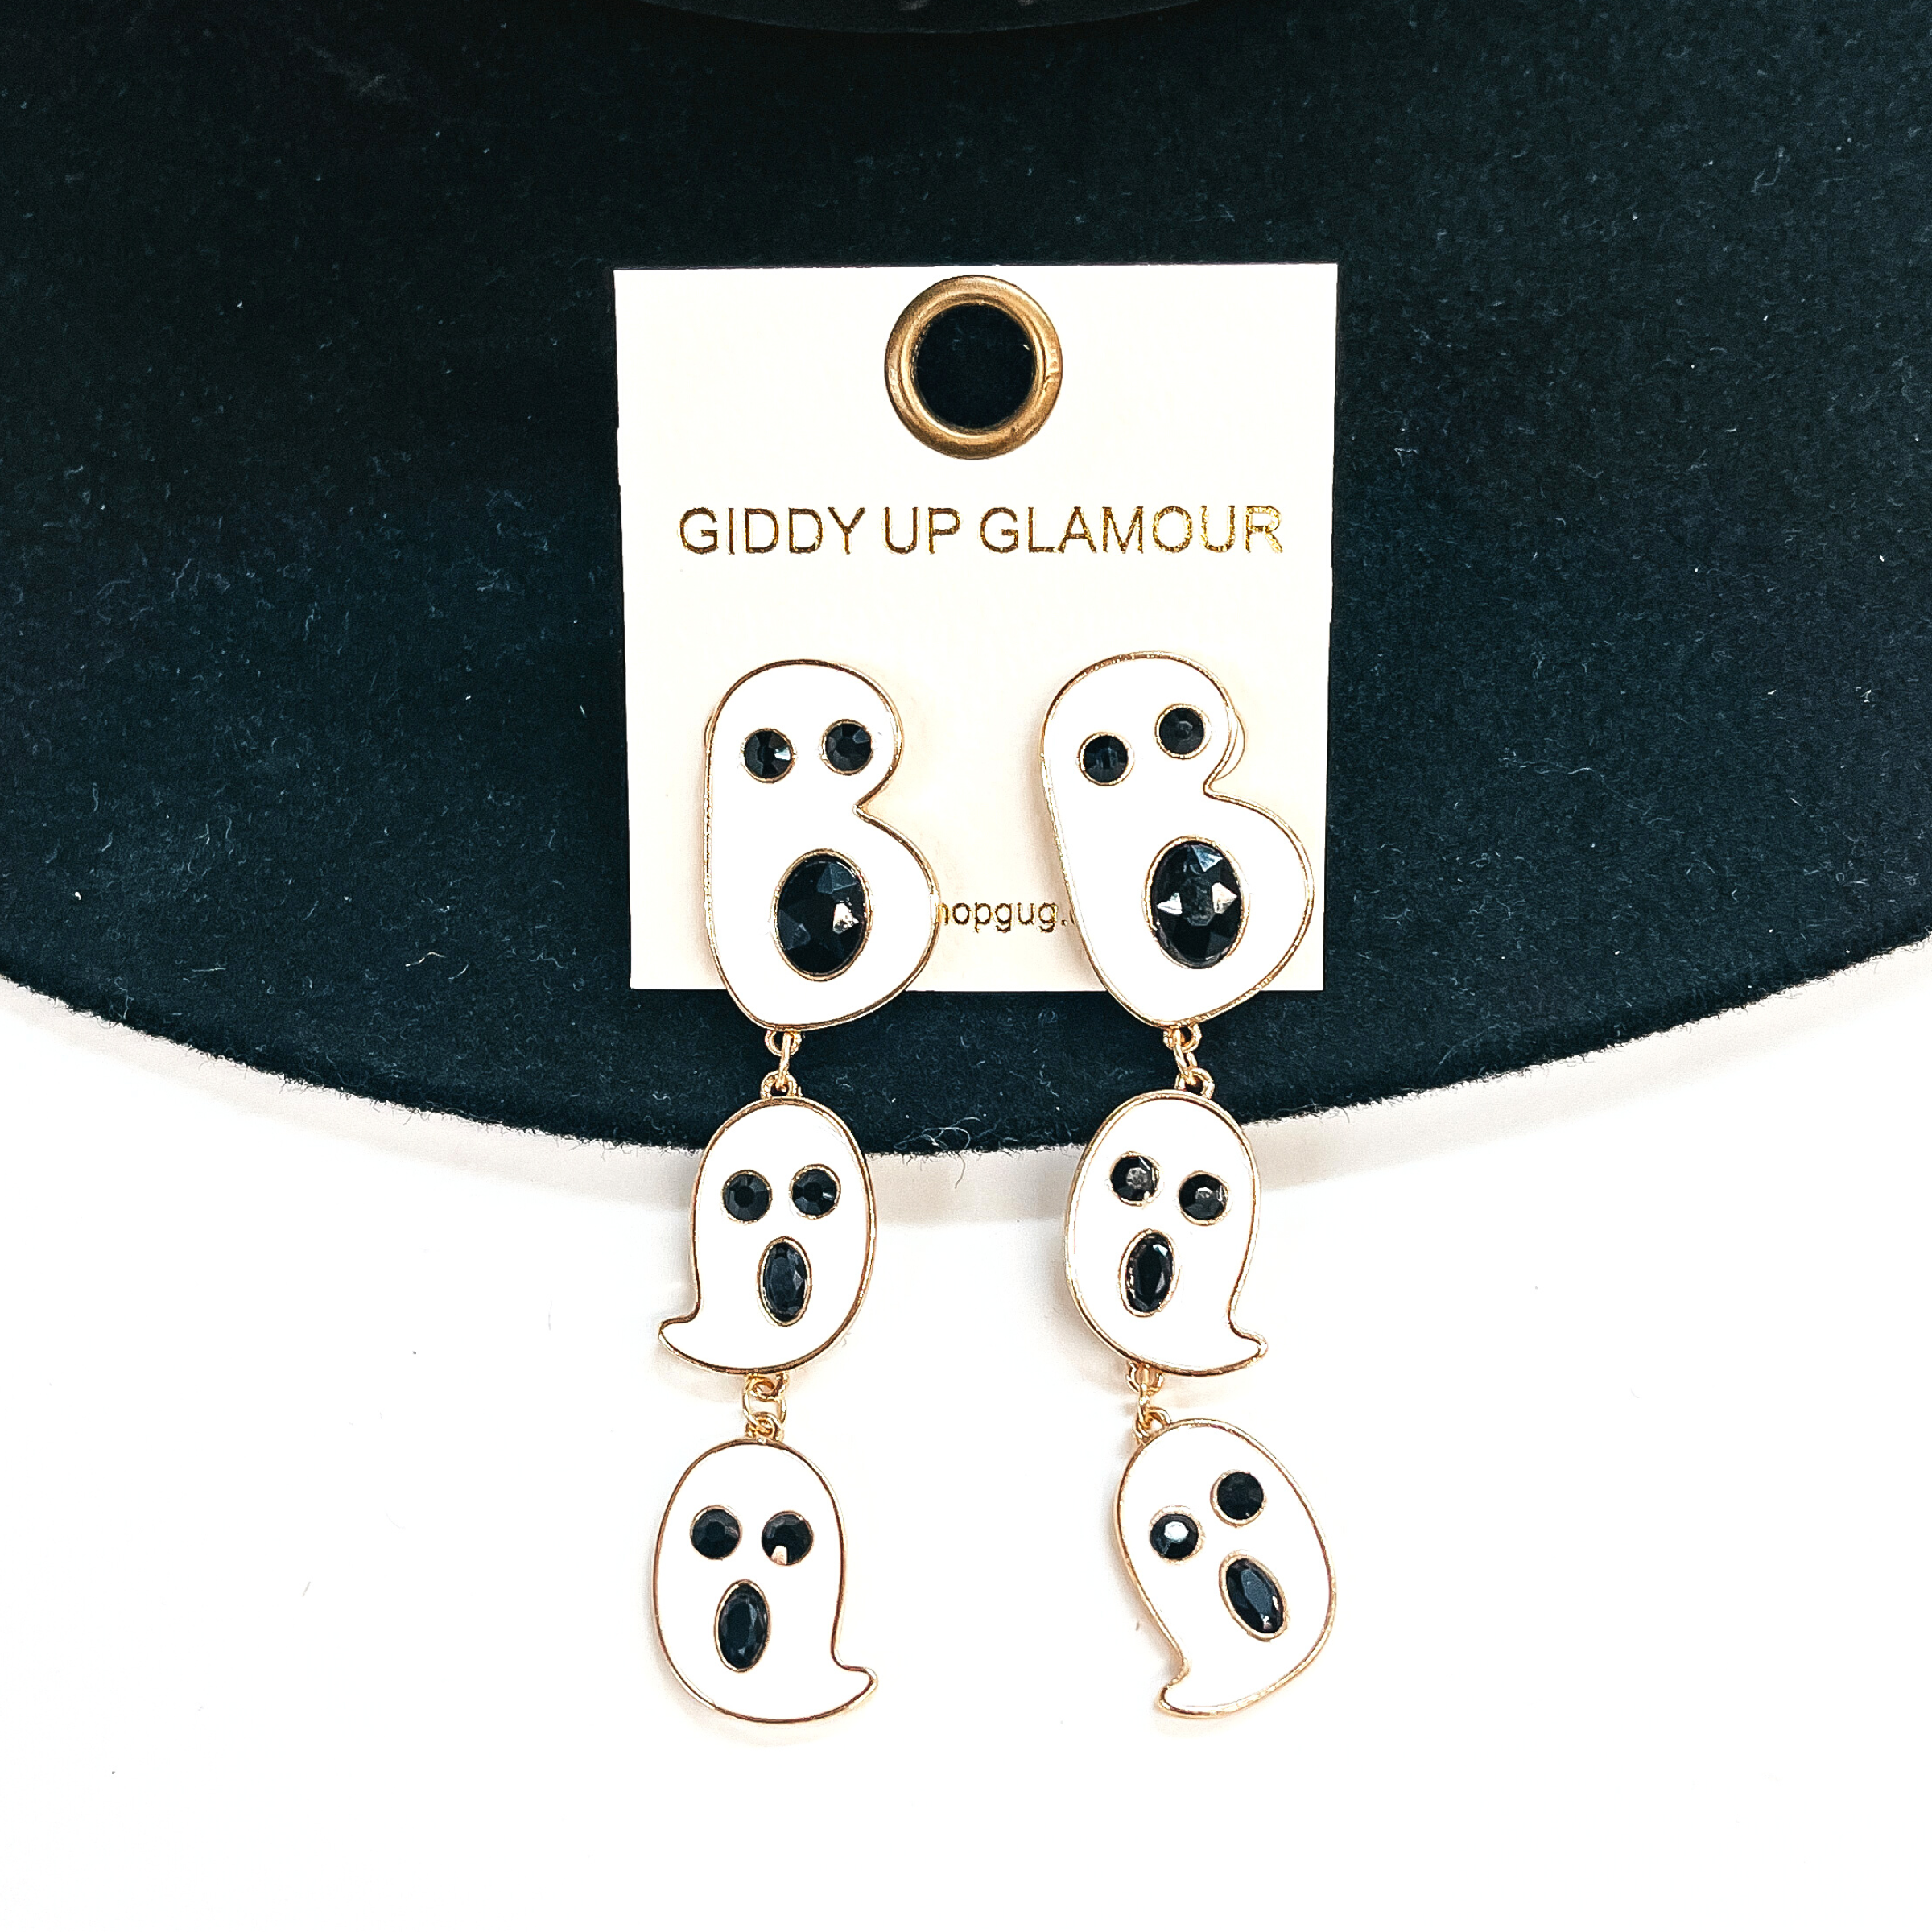 These are ghost shaped tiered drop earrings that spell out, Boo. They are in a gold setting and have black crystals as eyes and mouth, these are white.  These earrings are taken on a black felt hat brim and on a white background.